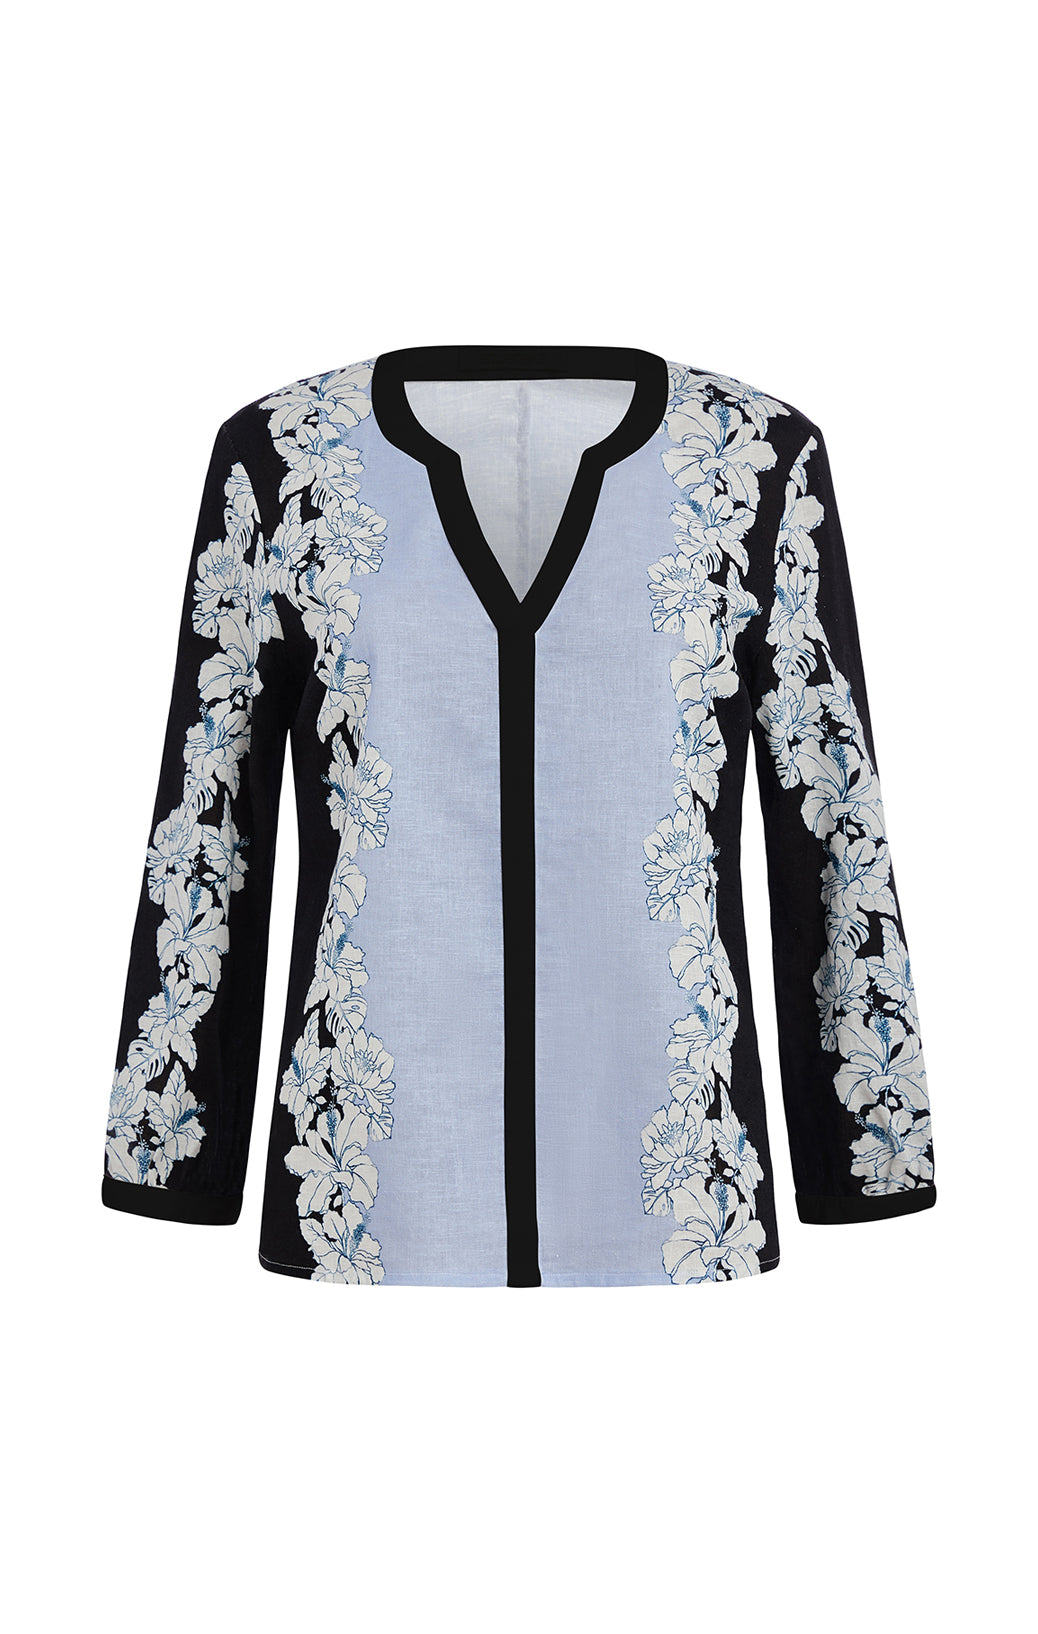 Grandiflora - Exploded Floral Intarsia Knit Cardigan Top - Product Image